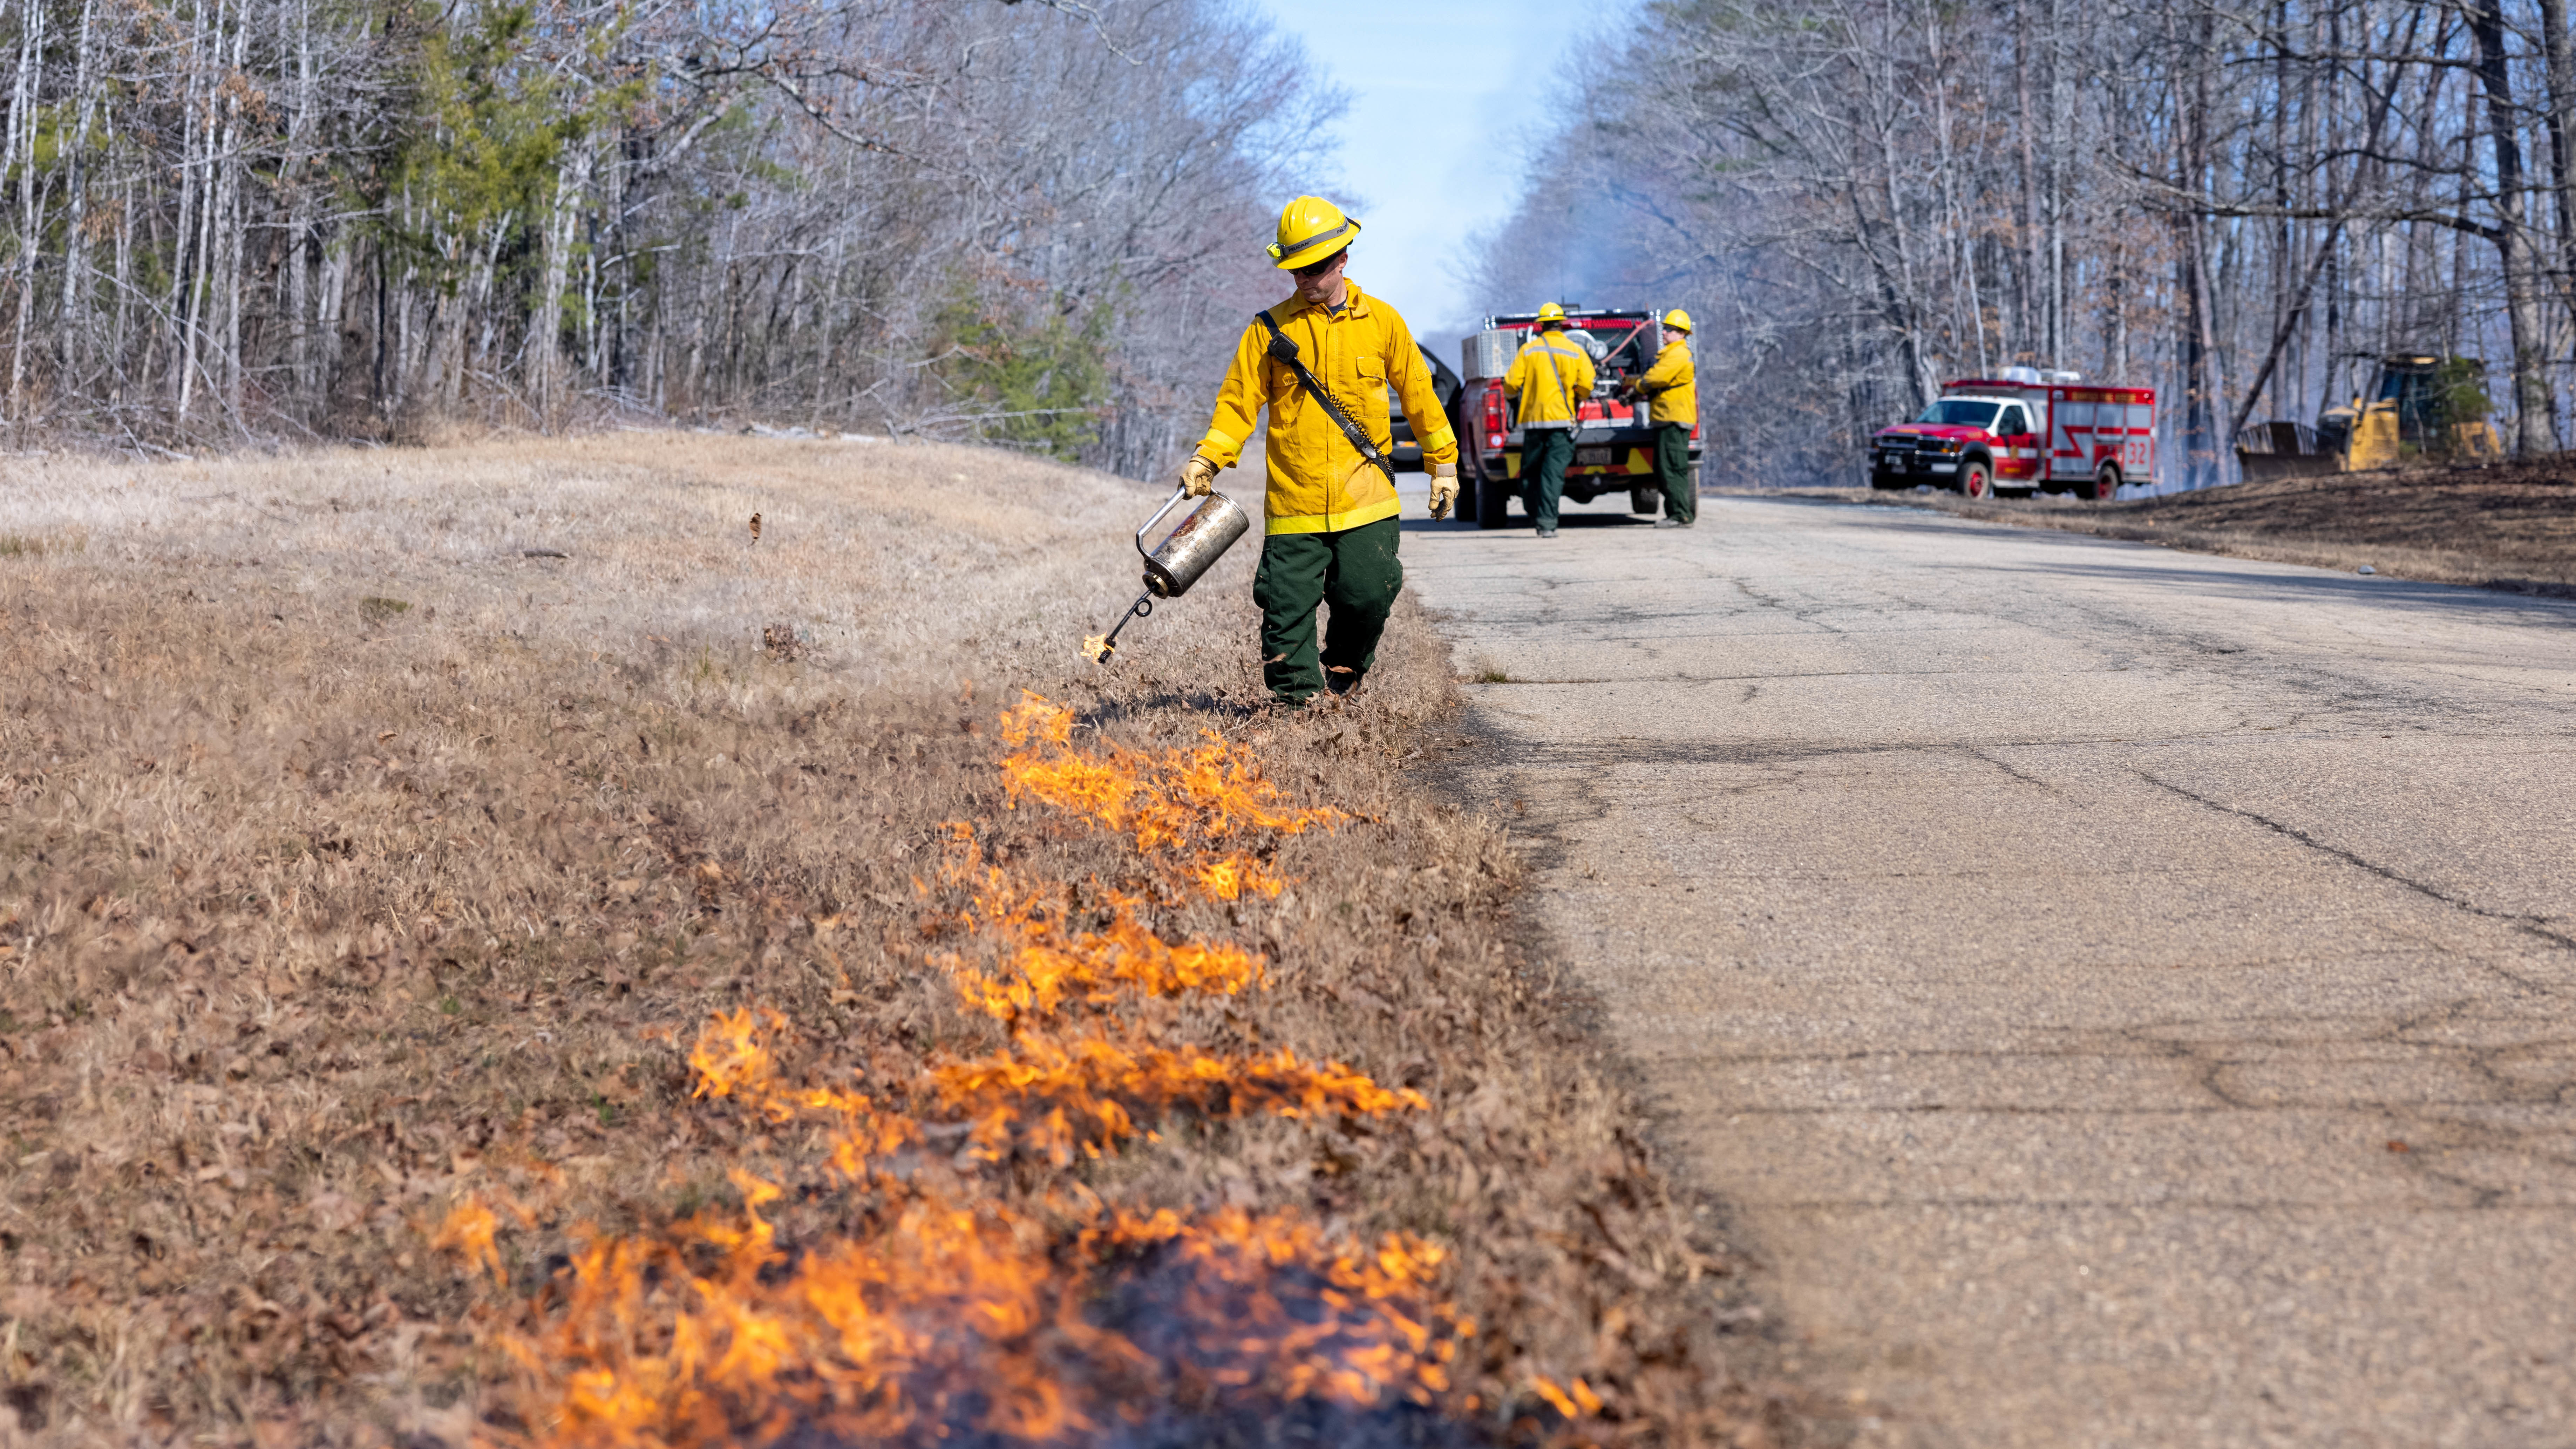 Mark Blake, Quantico Fire & Emergency Services, conducts controlled burns at Marine Corps Base Quantico, Virginia, March 9, 2023. According to the NREA, the purpose of the burns is to reduce fuel litter, minimize the potential of wildfires, and promote wildlife habitat. Fuel litter is dead and trodden woody debris that could be used as fuel for wildfires or other potential hazards.